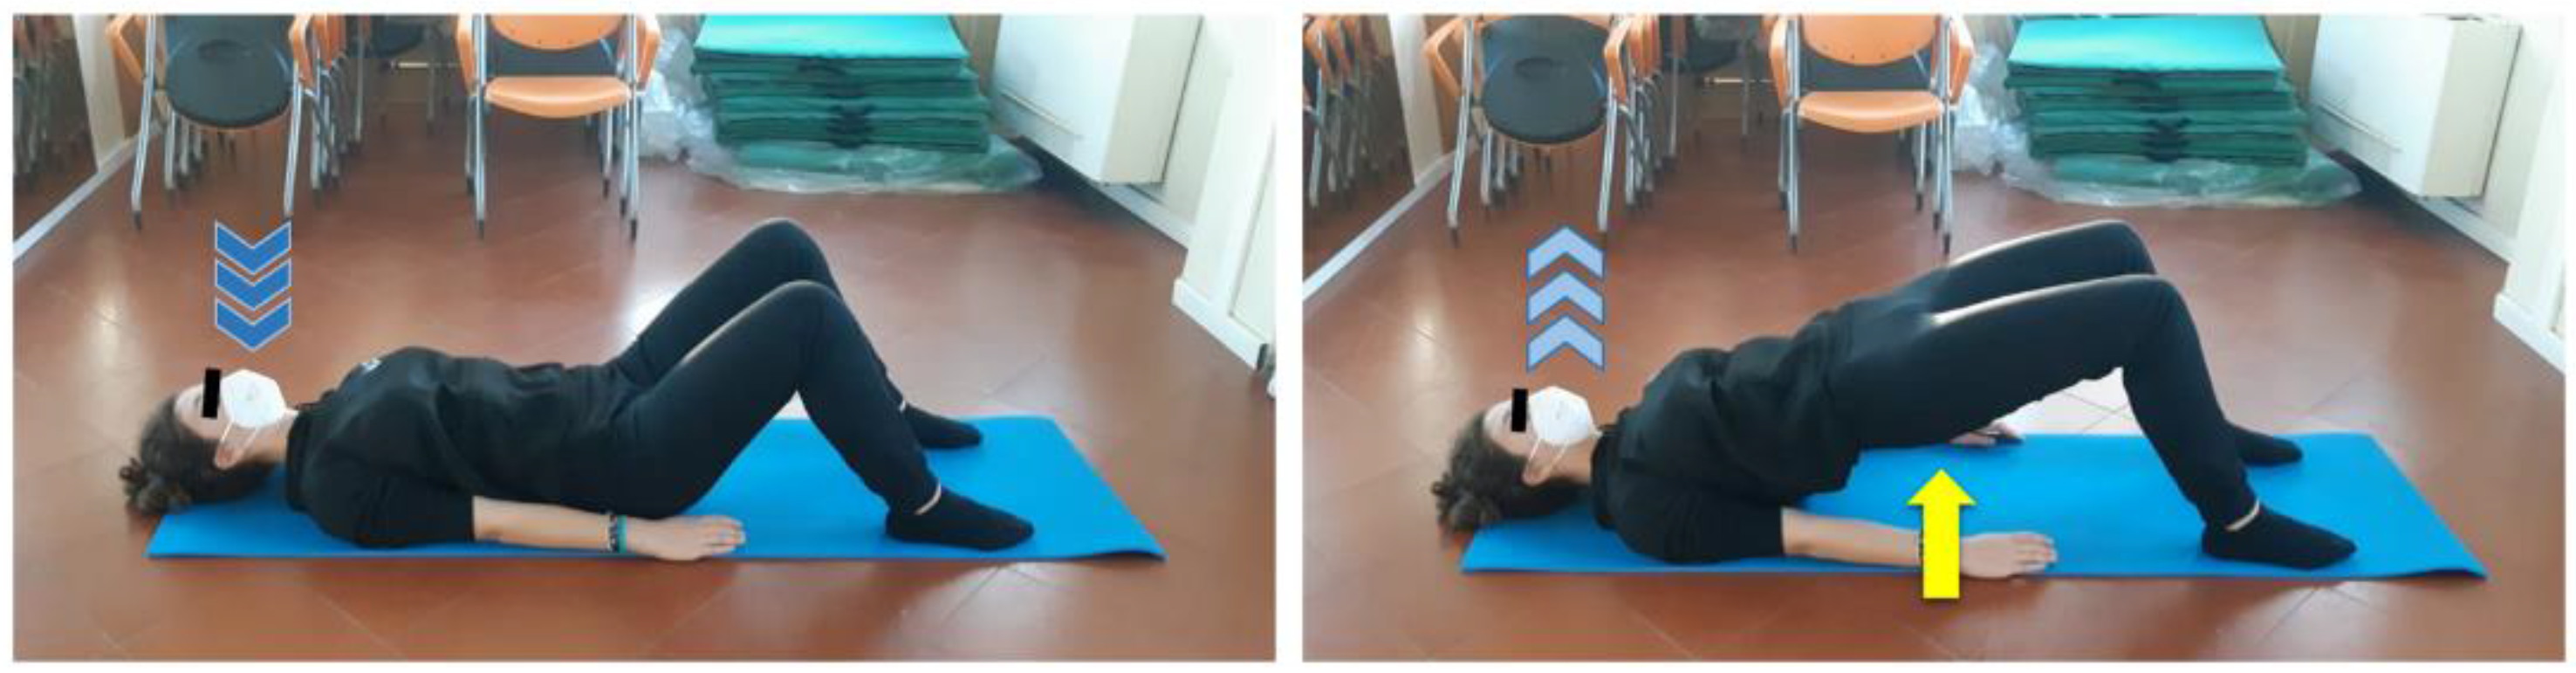 Glutes strengthening and hip mobility exercise. Supine position